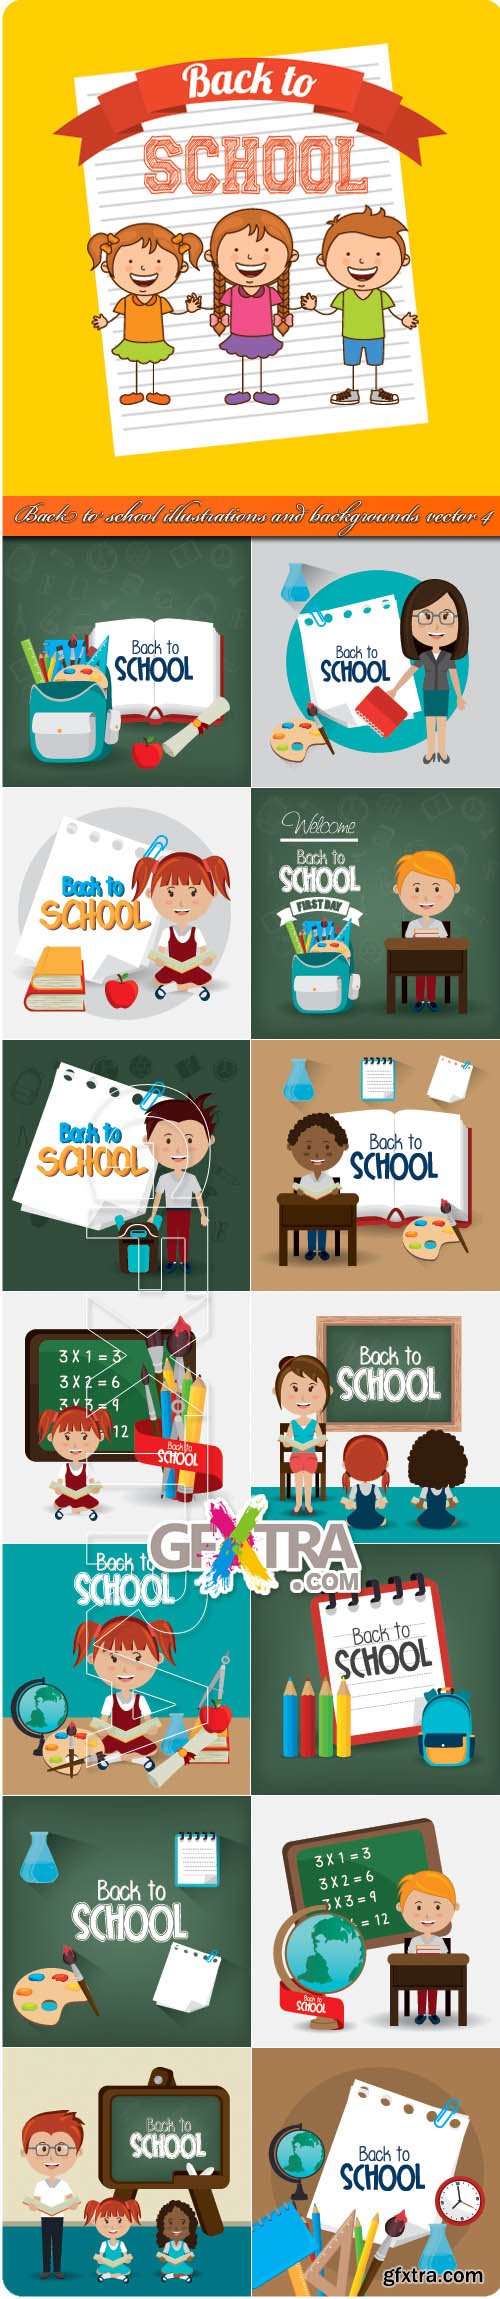 Back to school illustrations and backgrounds vector 4